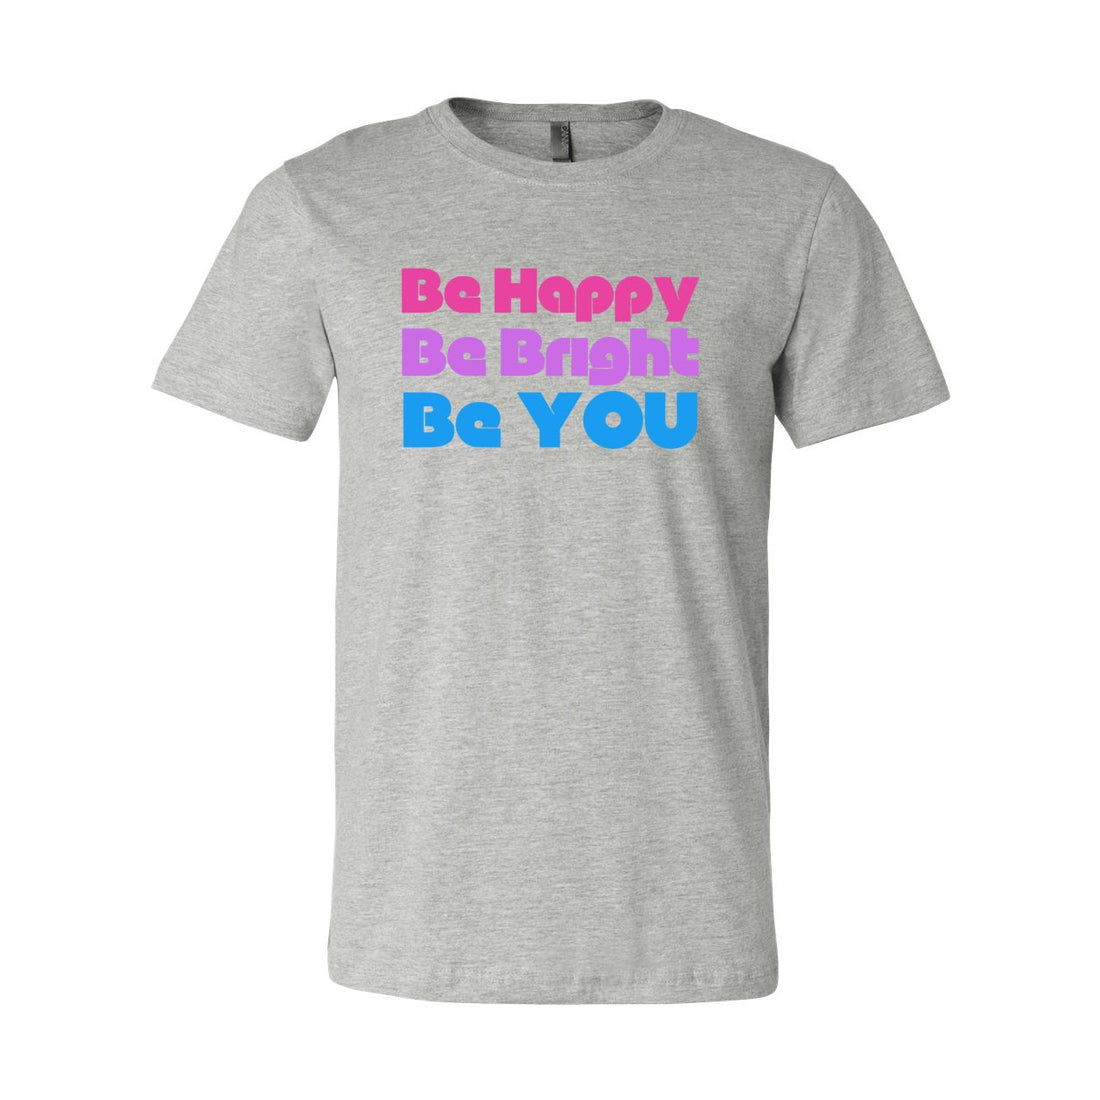 Be You Sleeve Jersey Tee - T-Shirts - Positively Sassy - Be You Sleeve Jersey Tee